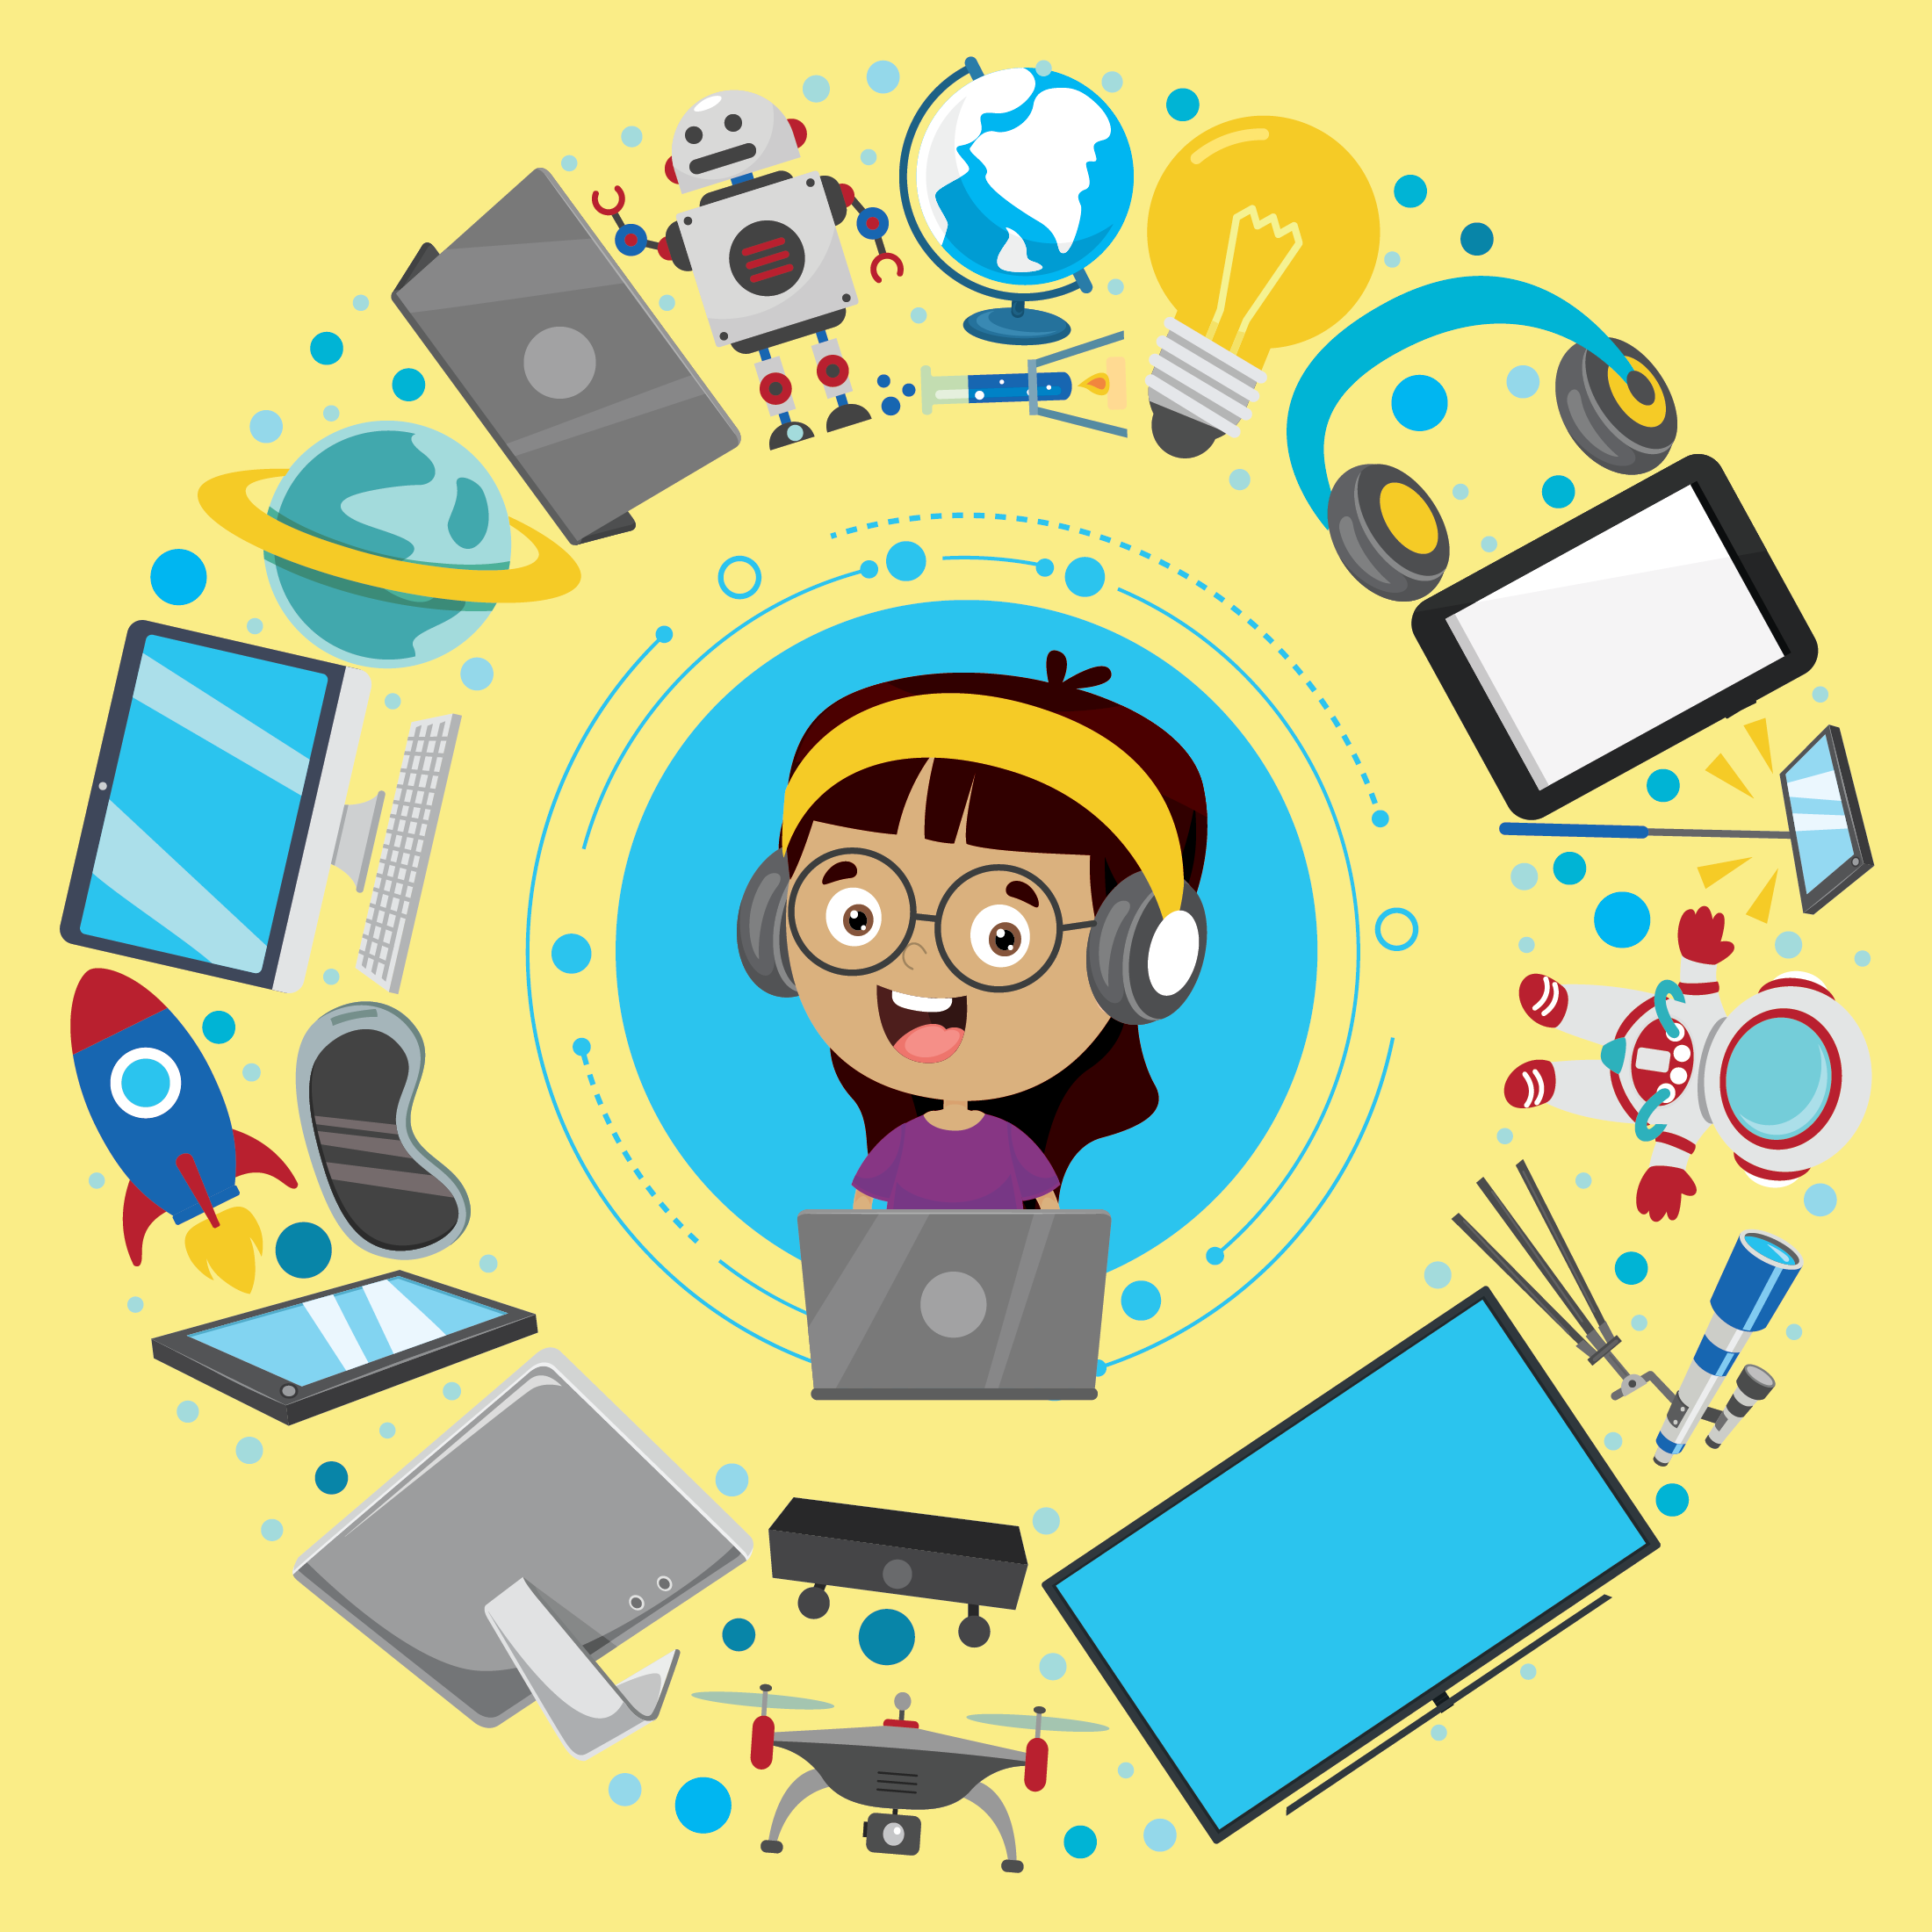 Image of cartoon girl surrounded by technology items